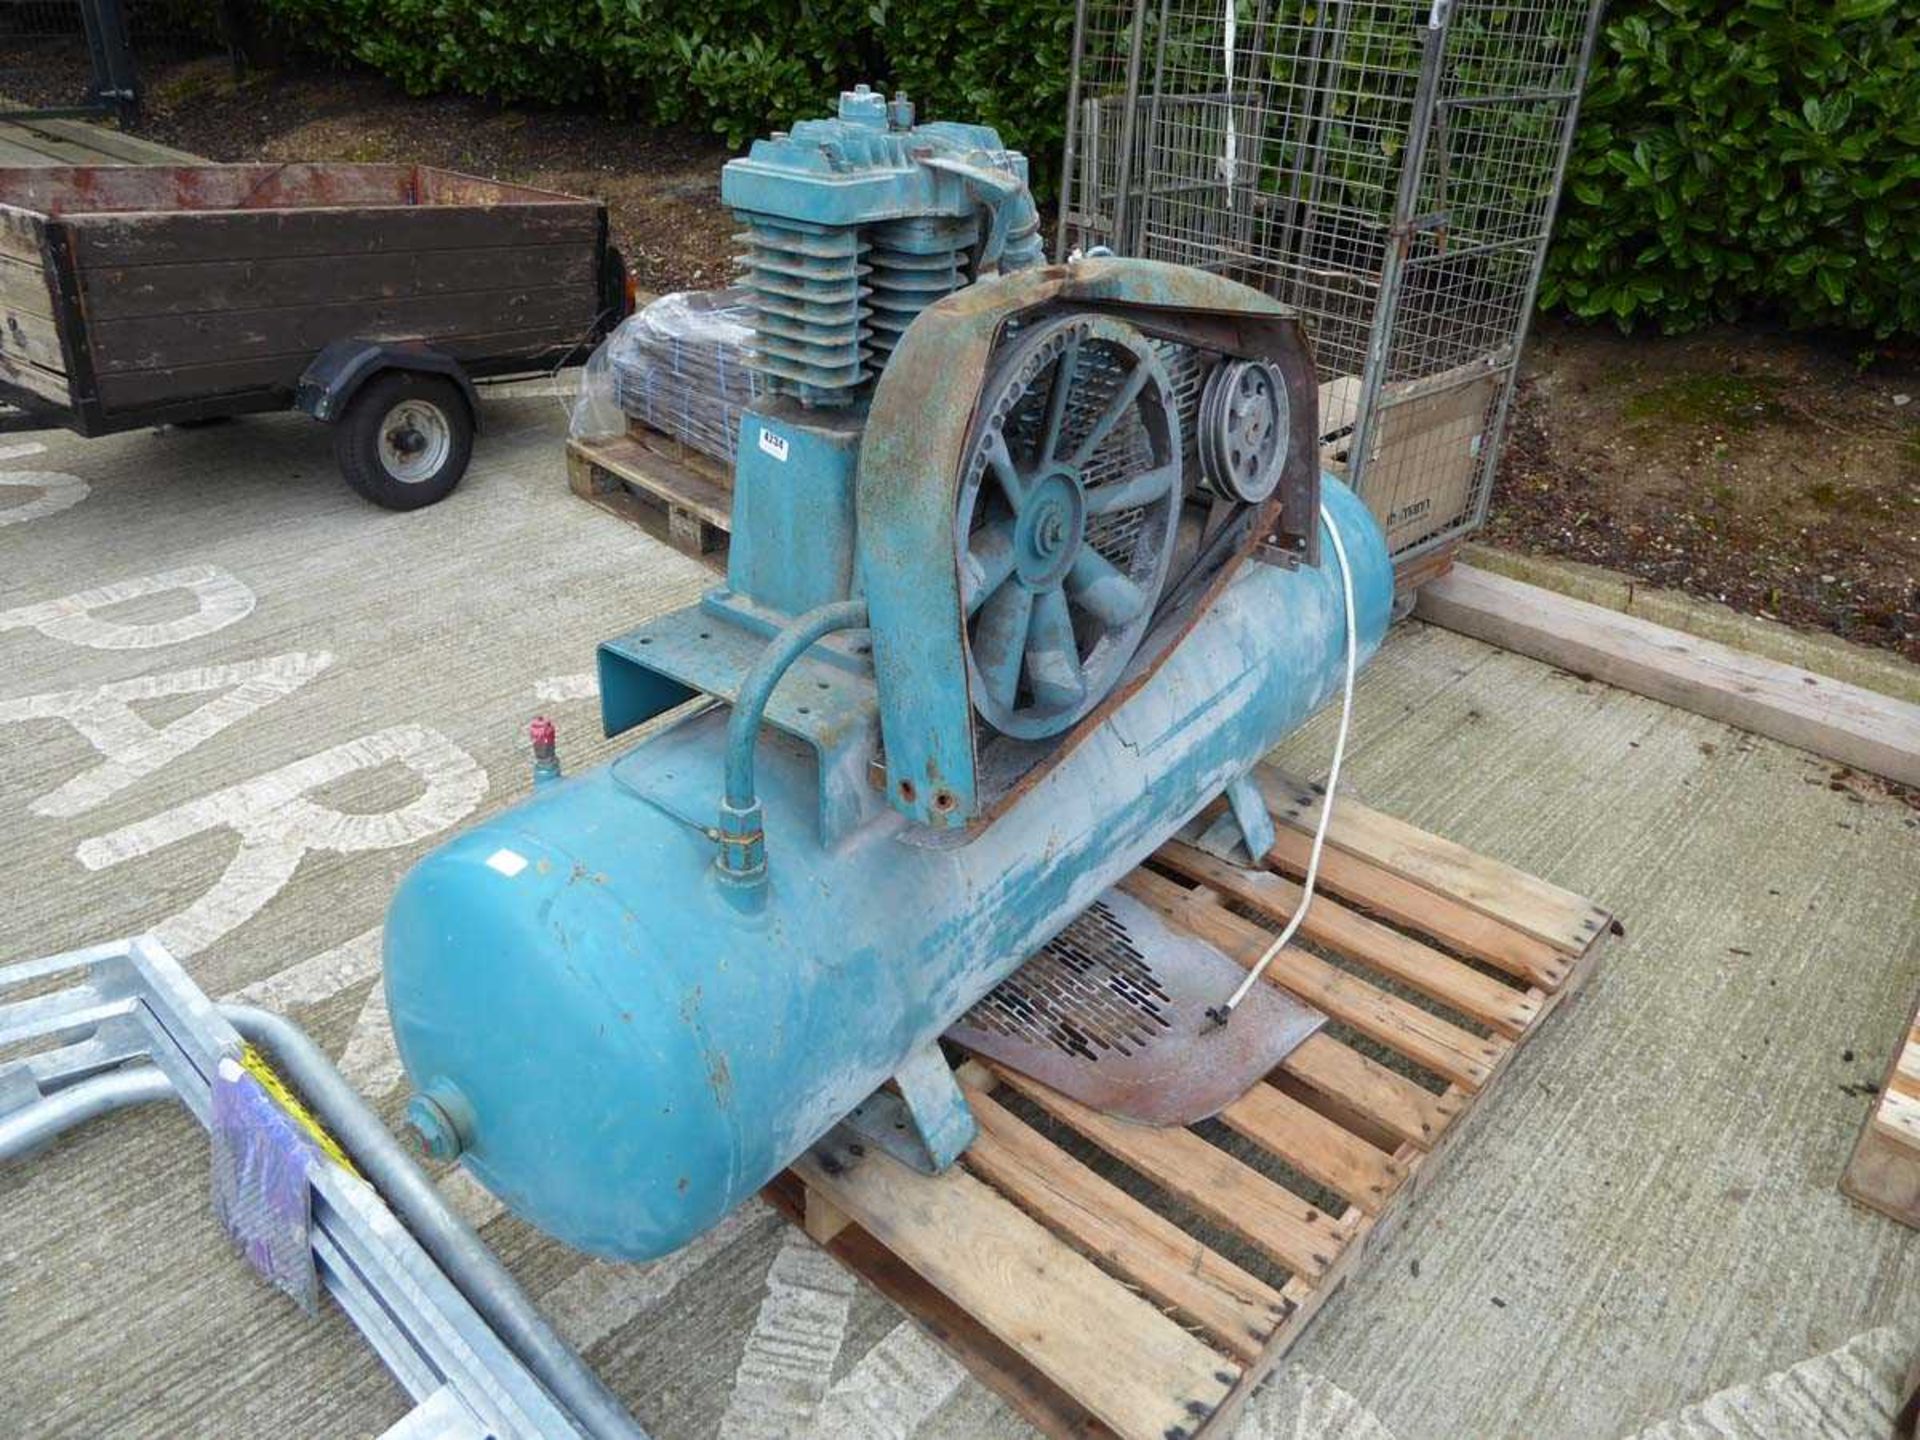 Large heavy duty compressor In need of repair